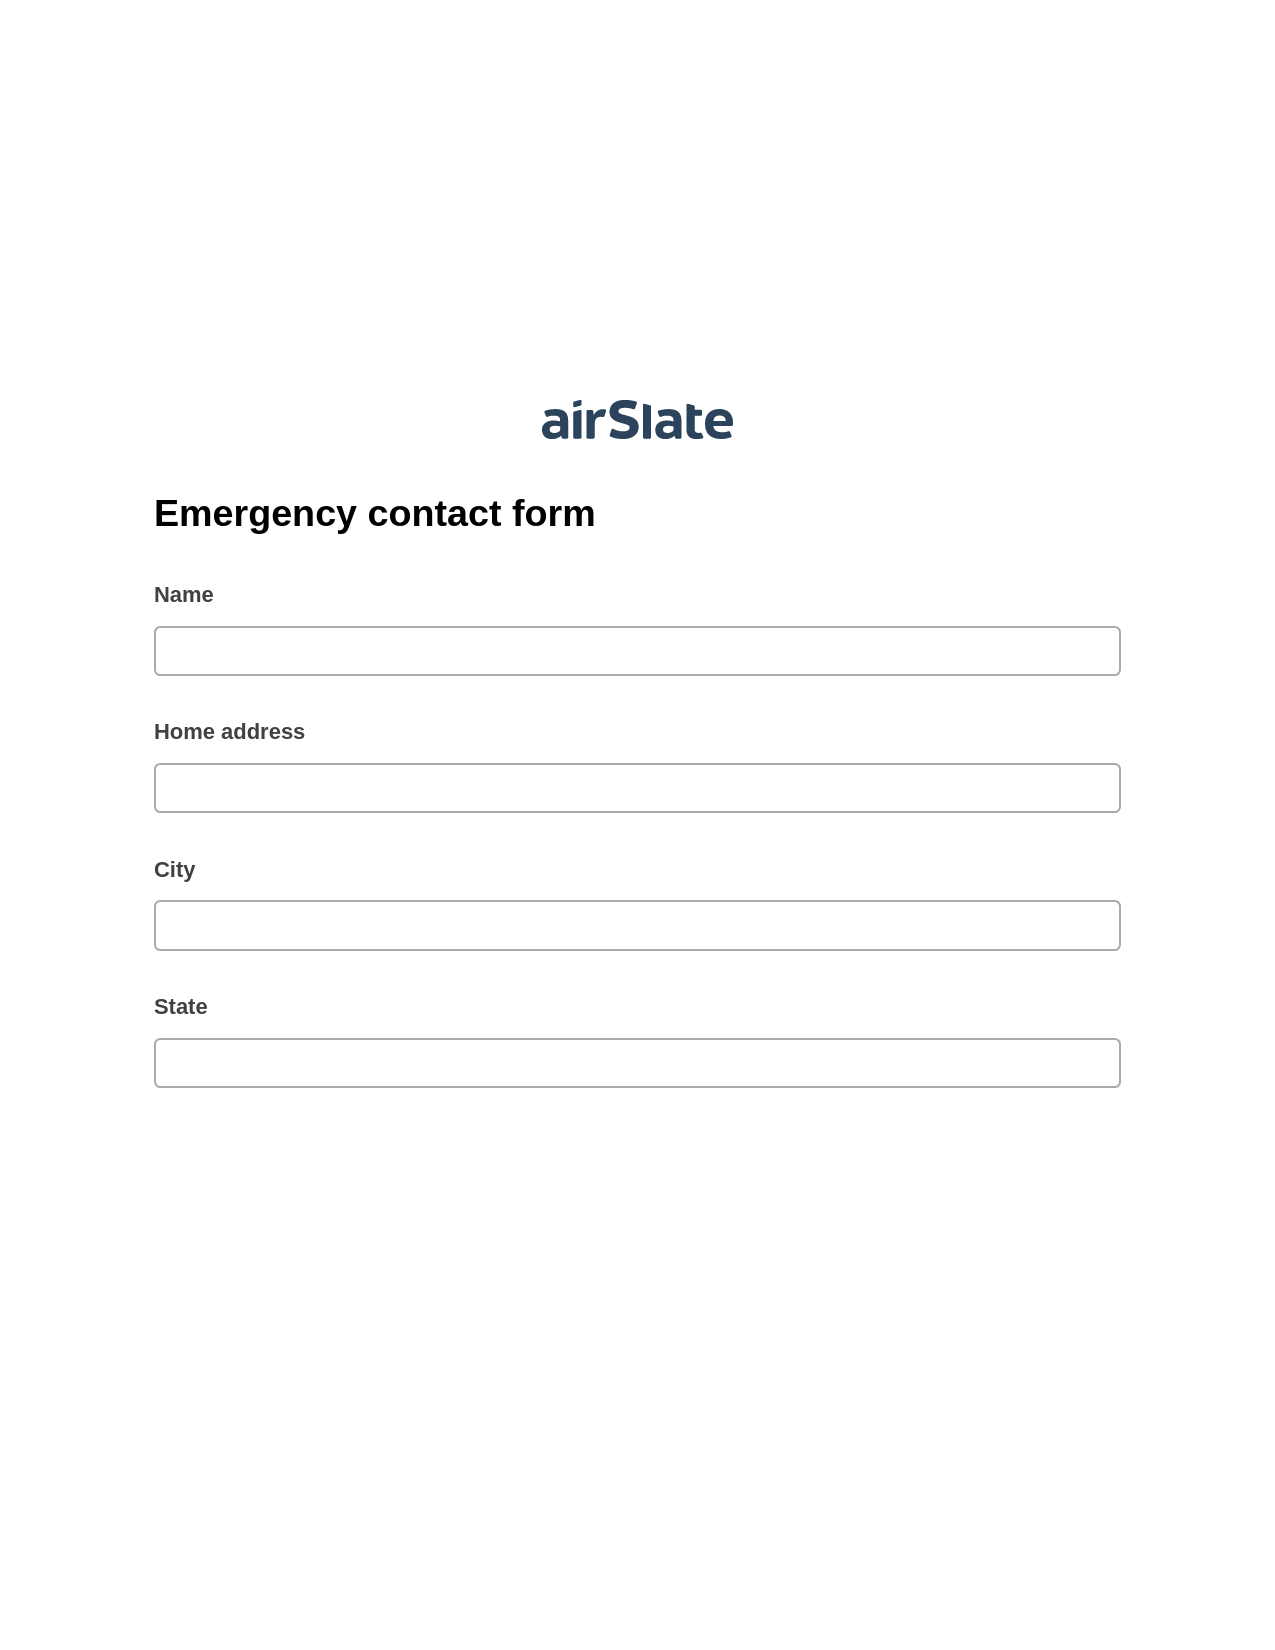 Emergency contact form System Bot - Slack Two-Way Binding Bot, Update NetSuite Records Bot, Export to Google Sheet Bot